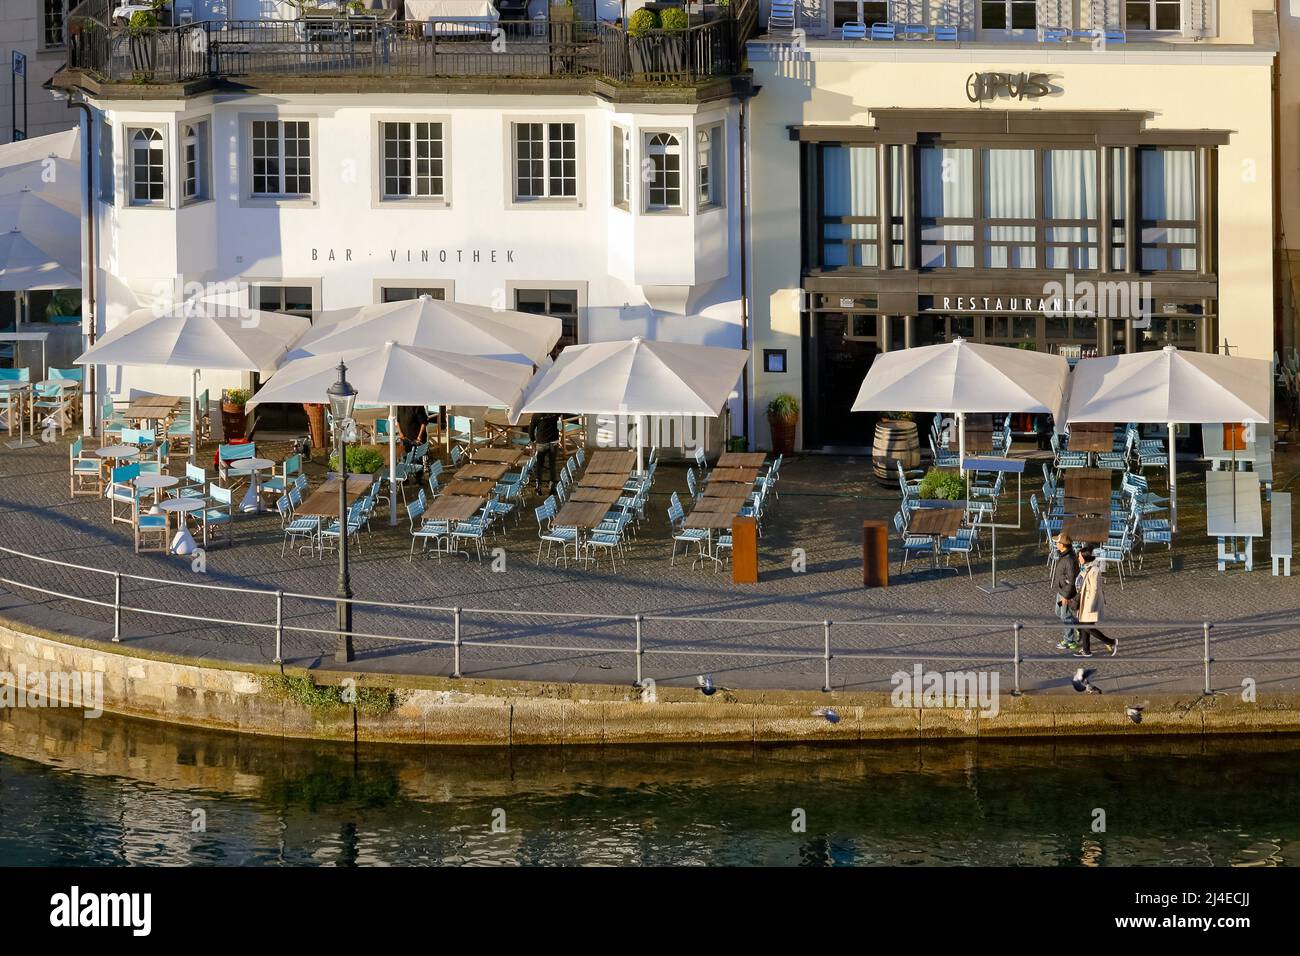 Lucerne, Switzerland - May 06, 2016: In the morning light, you can see two adjoining cafes with tables outside the buildings near the banks of the Reu Stock Photo